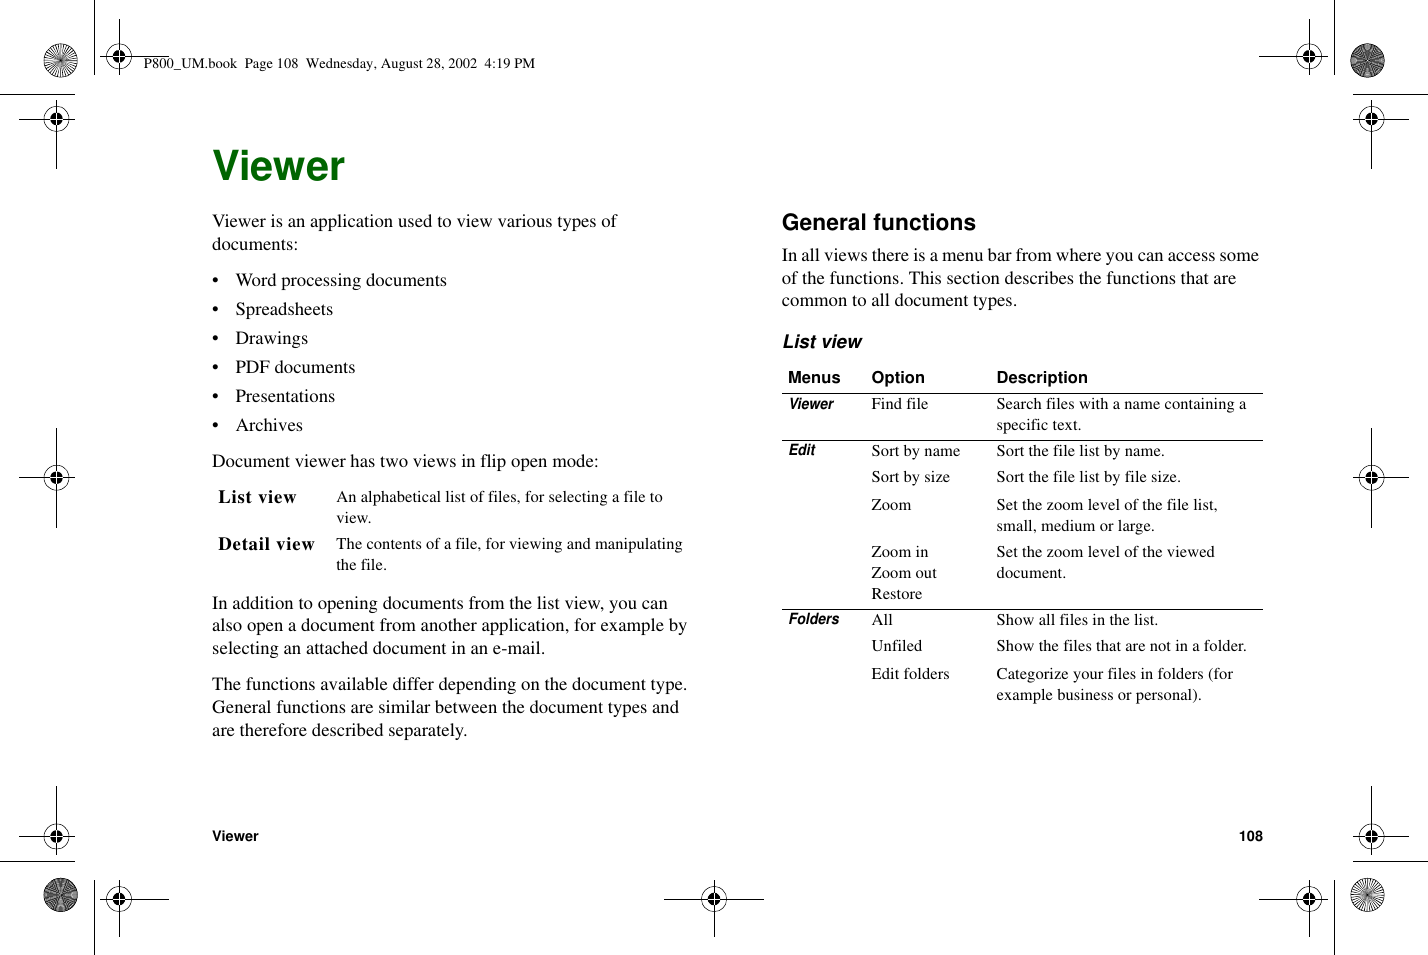 Viewer 108ViewerViewer is an application used to view various types ofdocuments:• Word processing documents• Spreadsheets•Drawings• PDF documents• Presentations•ArchivesDocument viewer has two views in flip open mode:In addition to opening documents from the list view, you canalso open a document from another application, for example byselecting an attached document in an e-mail.The functions available differ depending on the document type.General functions are similar between the document types andare therefore described separately.General functionsIn all views there is a menu bar from where you can access someof the functions. This section describes the functions that arecommon to all document types.List viewList view An alphabetical list of files, for selecting a file toview.Detail view The contents of a file, for viewing and manipulatingthe file.Menus Option DescriptionViewerFind file Search files with a name containing aspecific text.EditSort by name Sort the file list by name.Sort by size Sort the file list by file size.Zoom Set the zoom level of the file list,small, medium or large.Zoom inZoom outRestoreSet the zoom level of the vieweddocument.FoldersAll Show all files in the list.Unfiled Show the files that are not in a folder.Edit folders Categorize your files in folders (forexample business or personal).P800_UM.book Page 108 Wednesday, August 28, 2002 4:19 PM